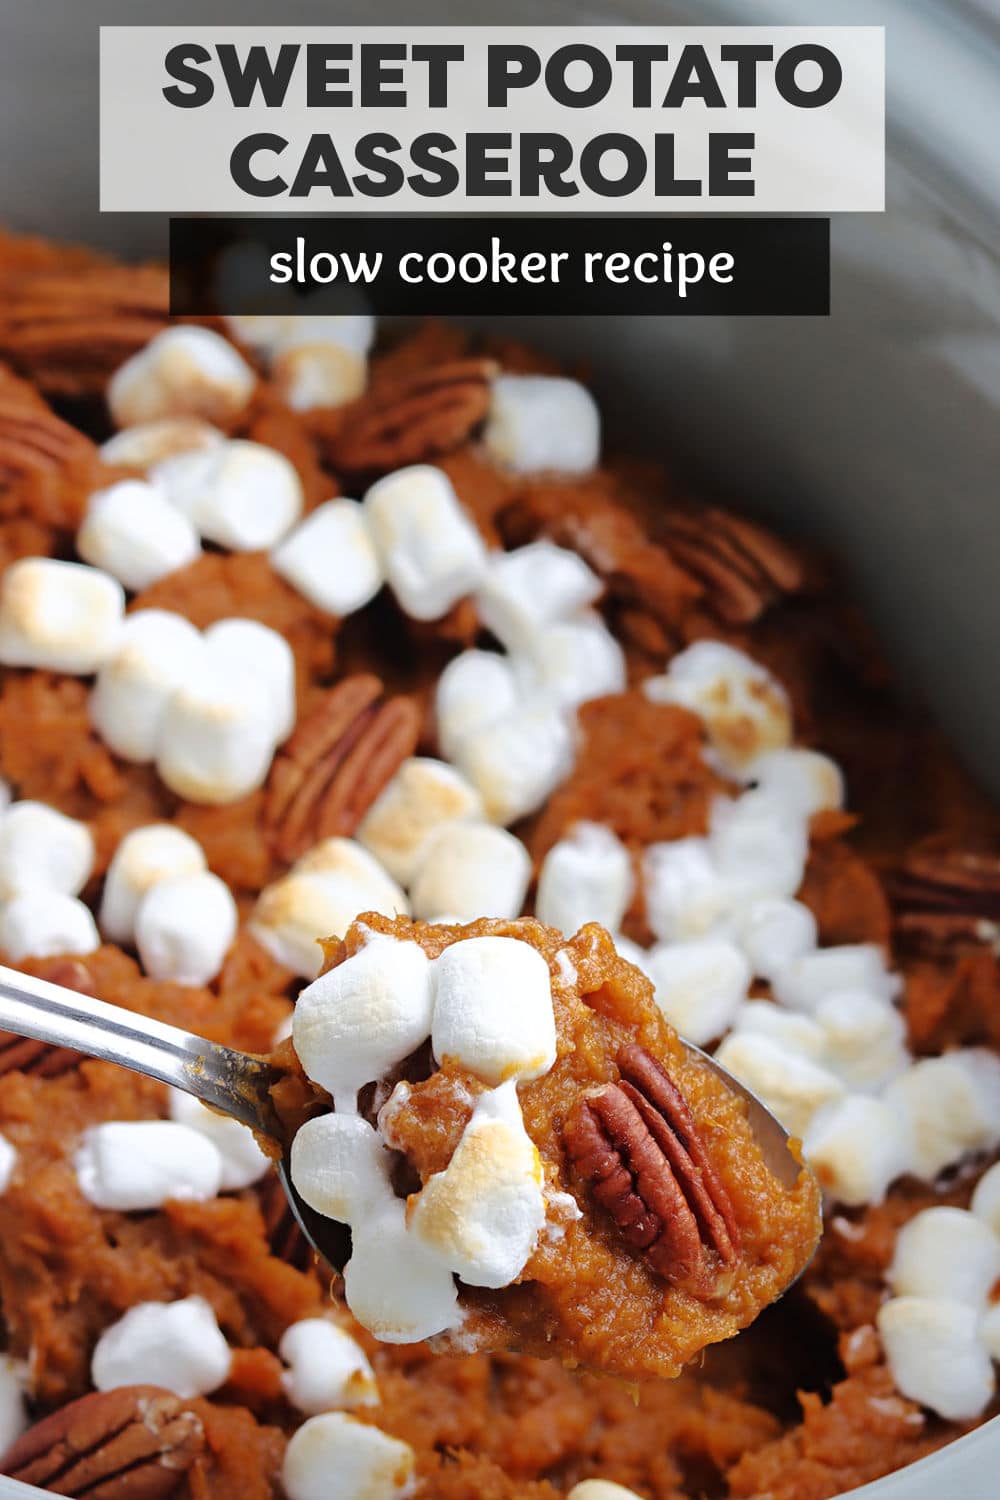 Free up oven space on holidays with this easy Slow Cooker Sweet Potato Casserole. Creamy sweet potatoes topped with a gooey marshmallow topping and pecans made right in the crockpot! | www.persnicketyplates.com